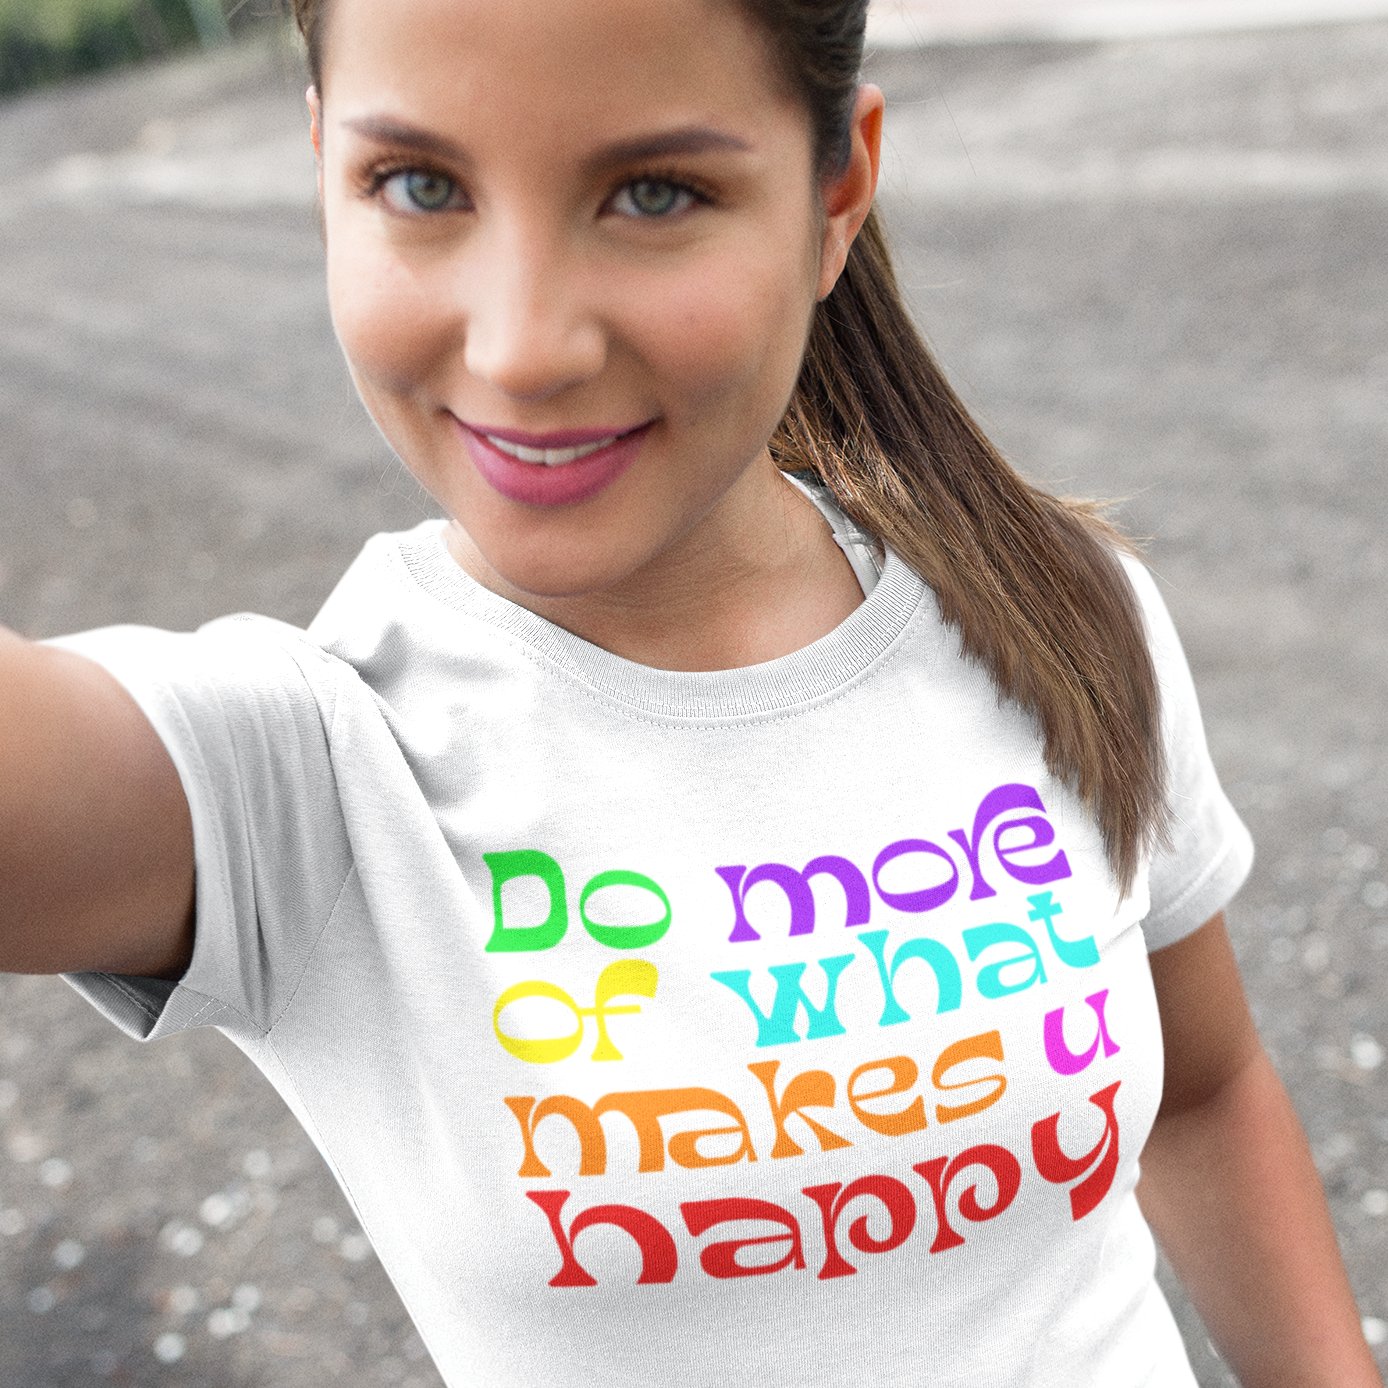 Woman wearing a colorful do more of what makes you happy t-shirt